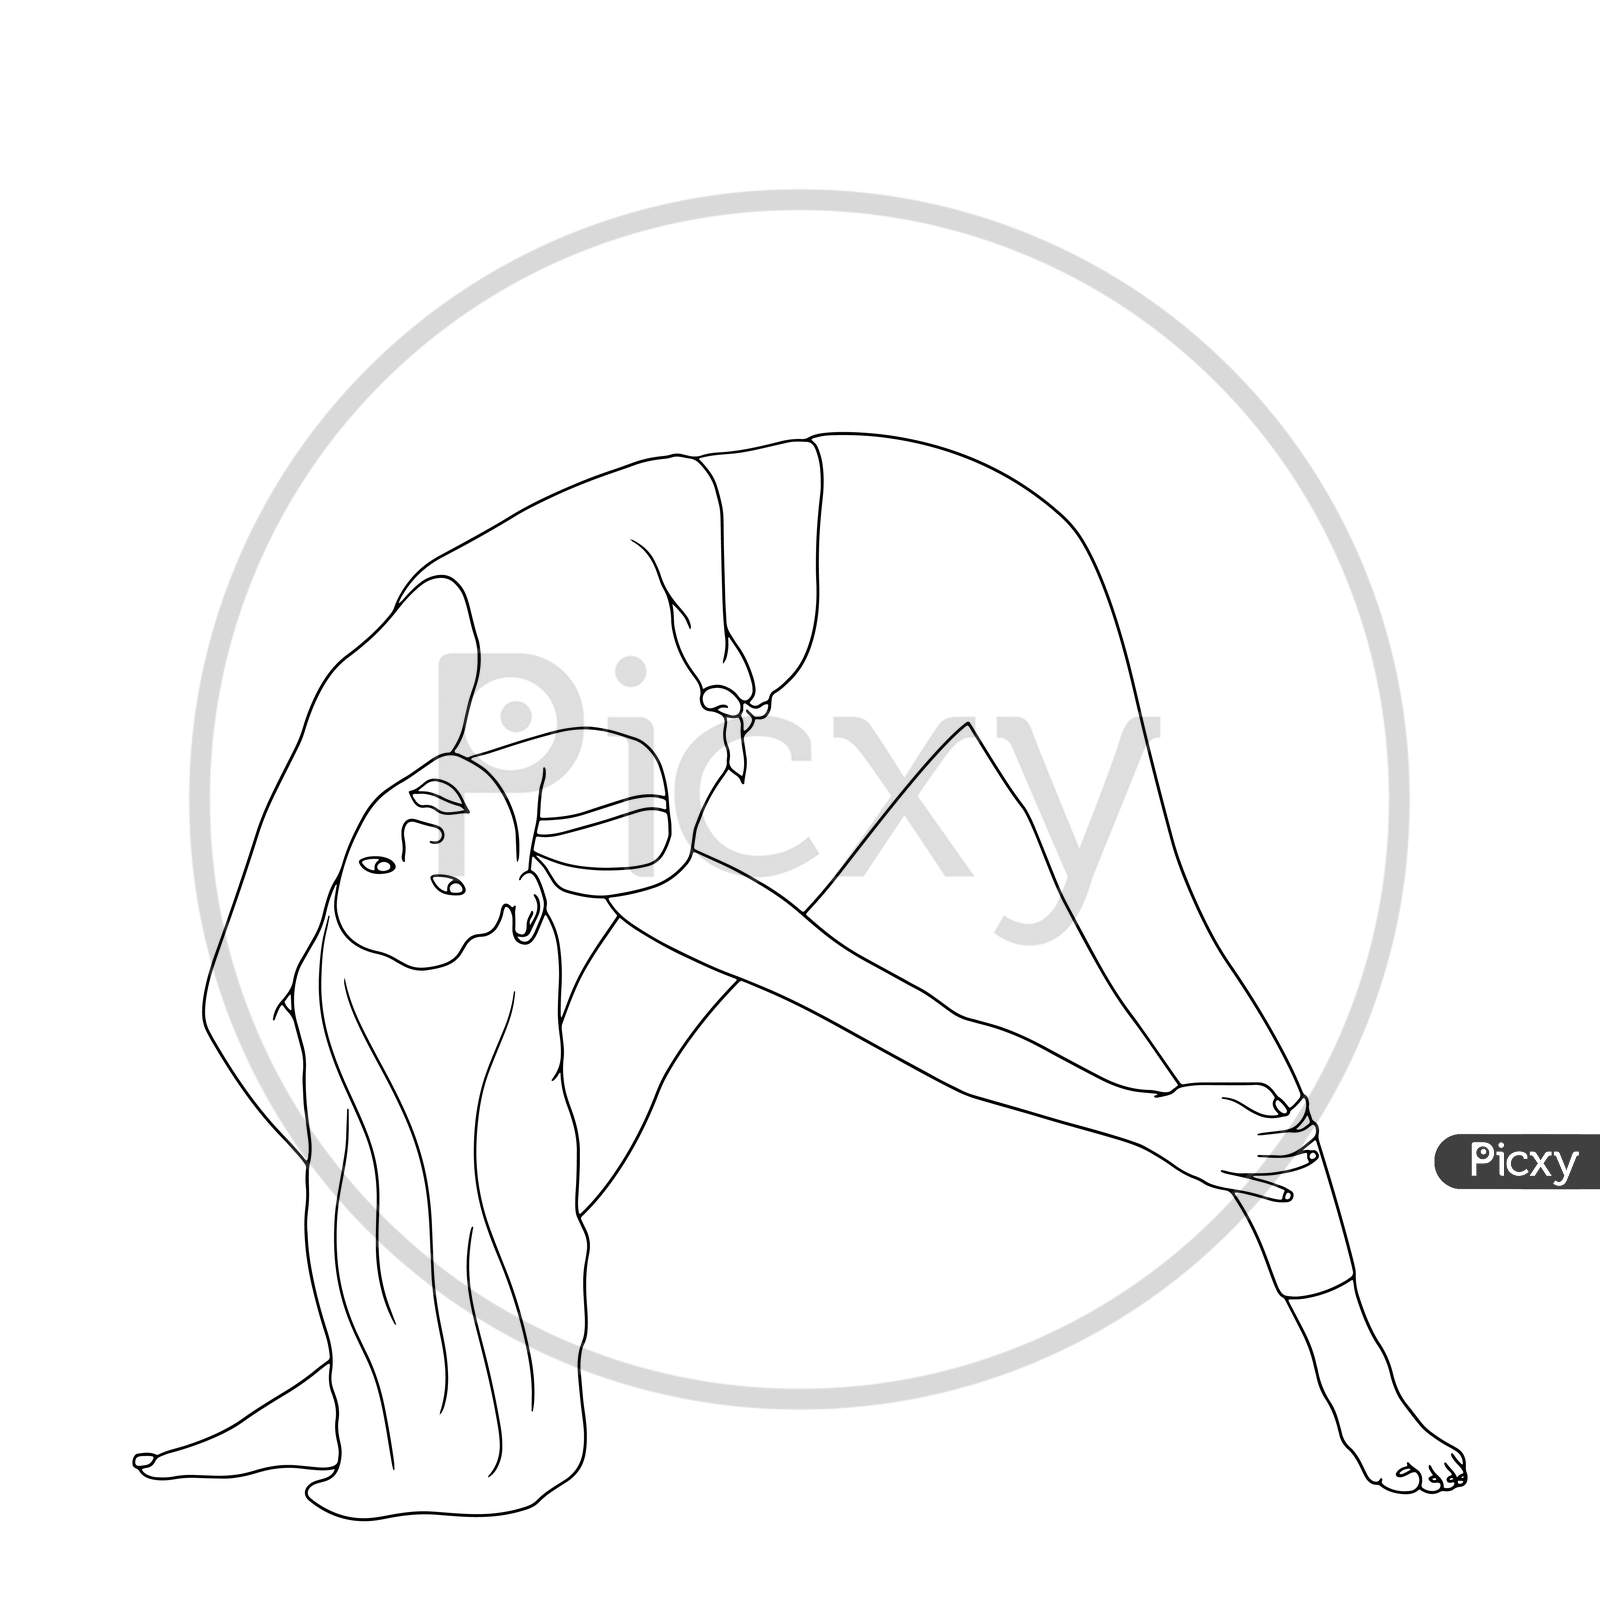 how to draw yoga poses - YouTube